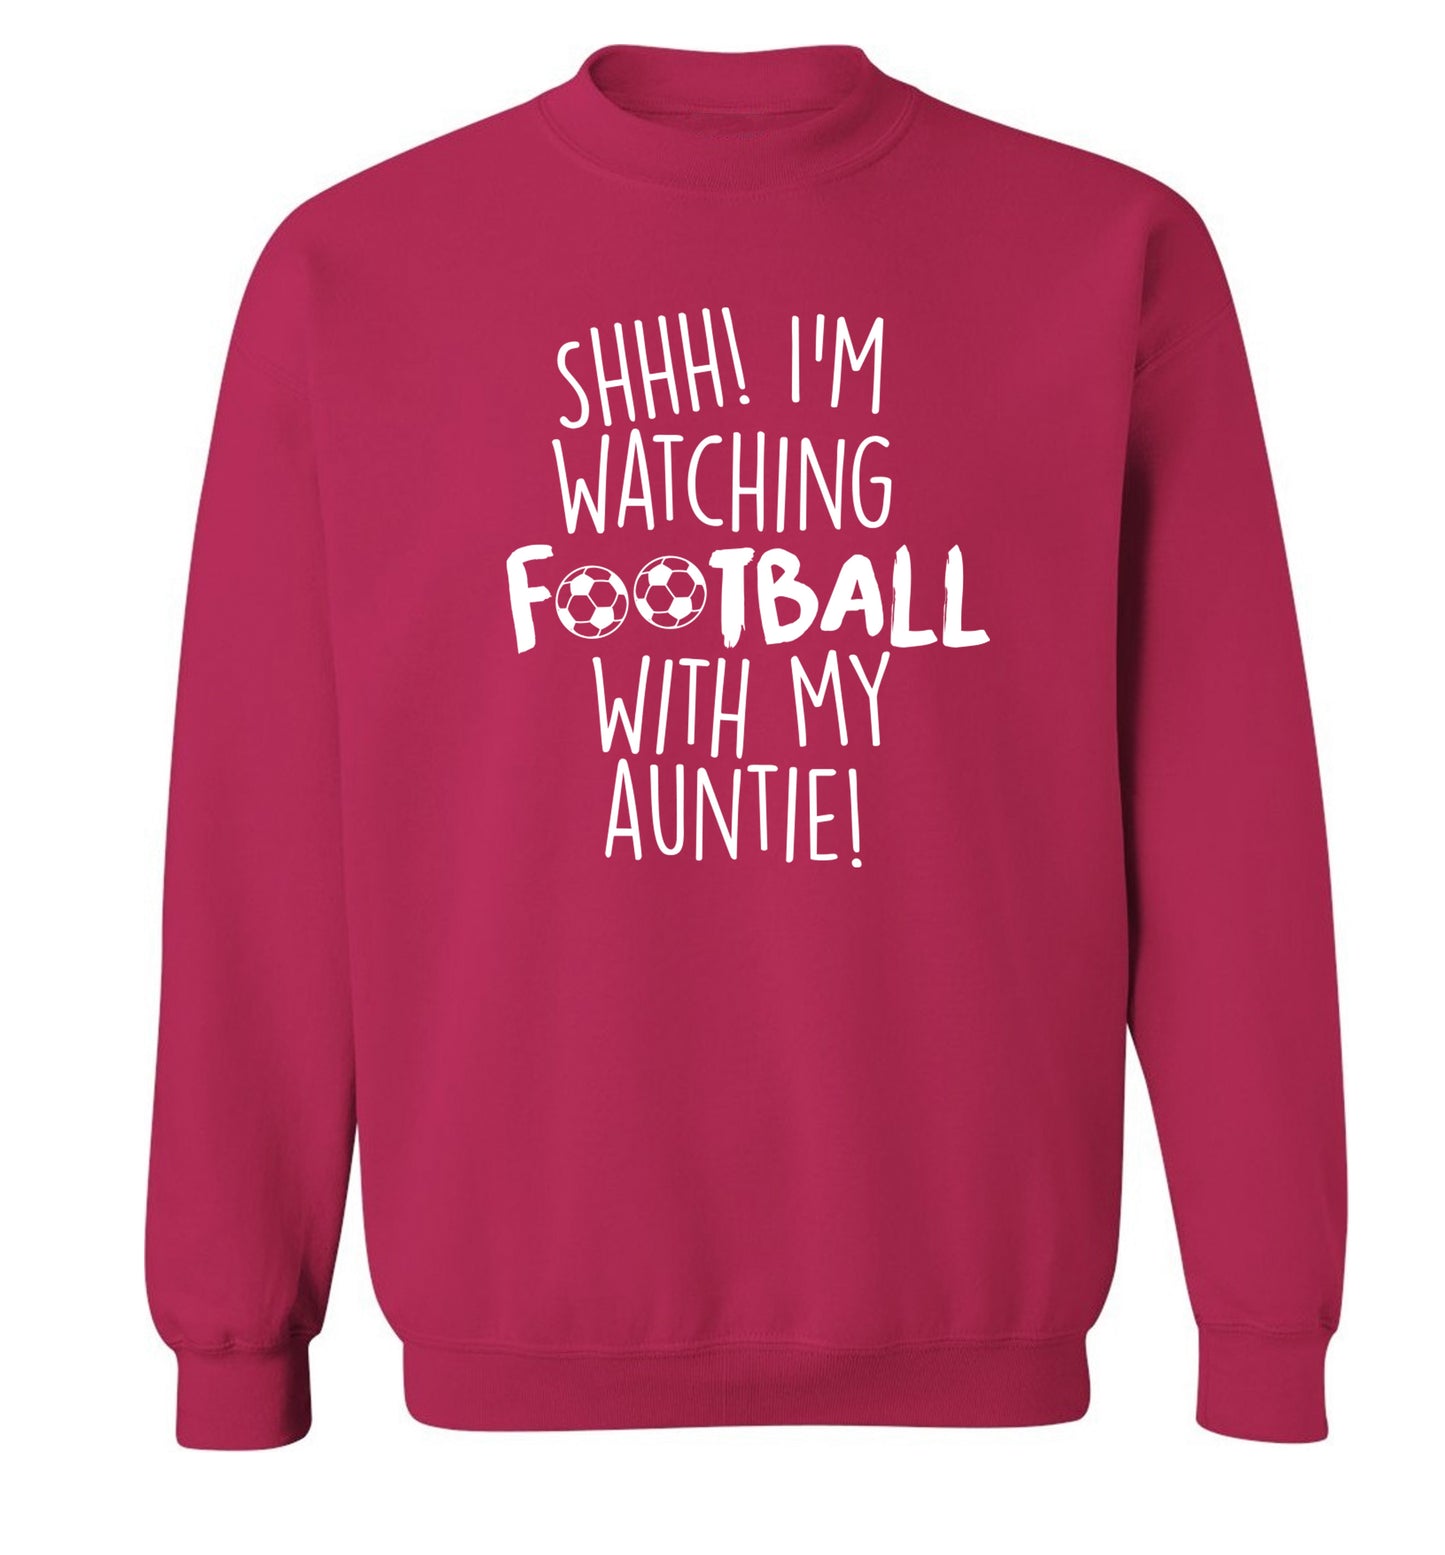 Shhh I'm watching football with my auntie Adult's unisexpink Sweater 2XL